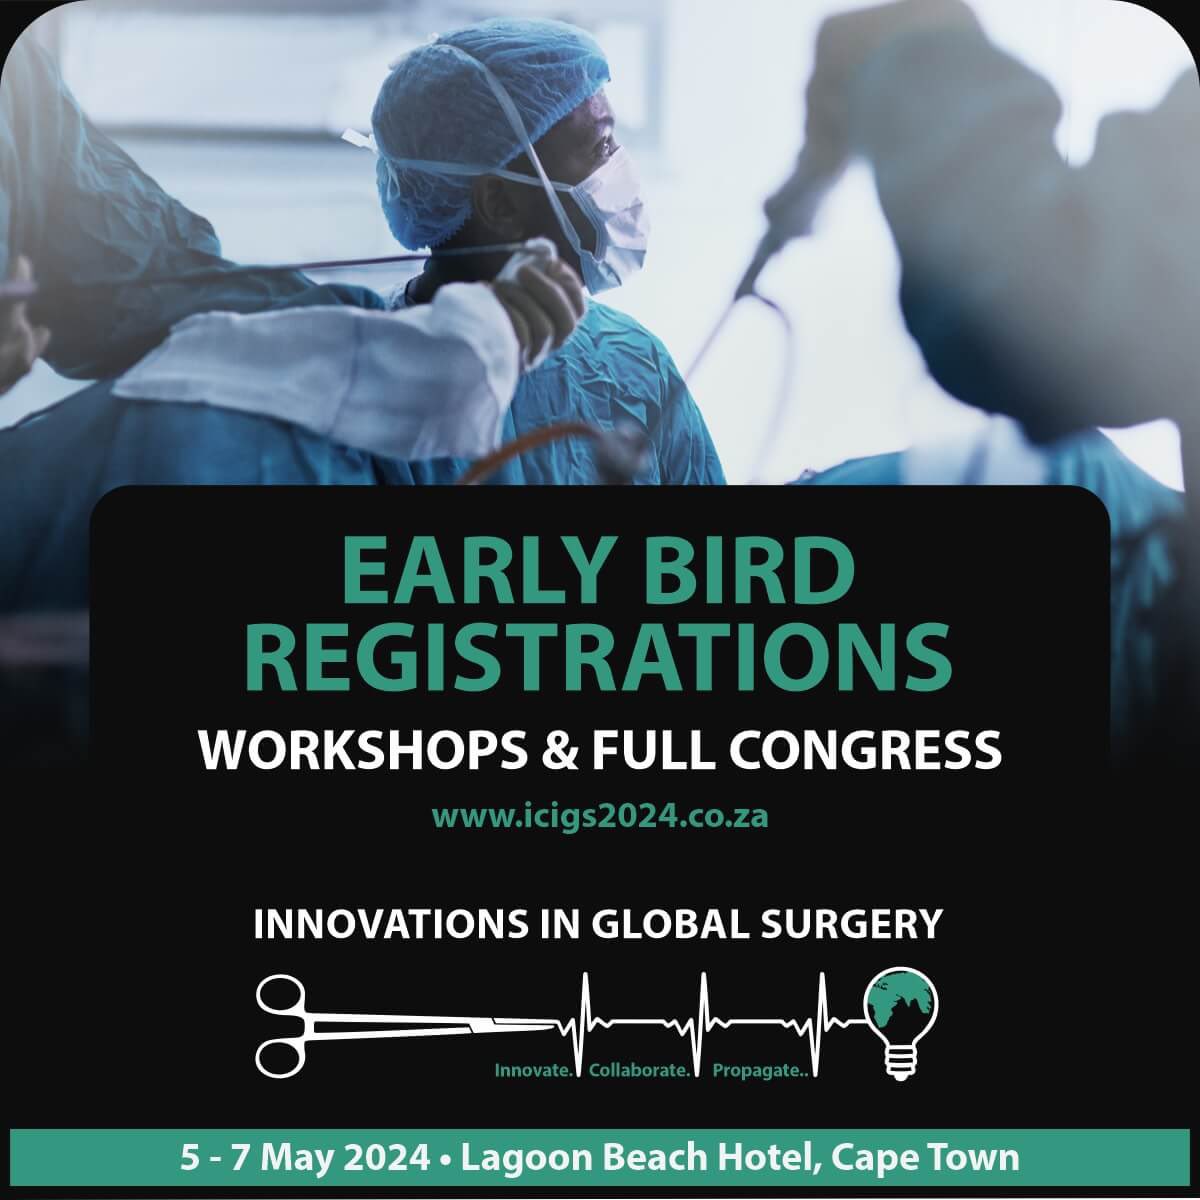 We are hosting the 3rd International Congress in Innovations for Global Surgery at UCT. Register now at icigs2024.co.za